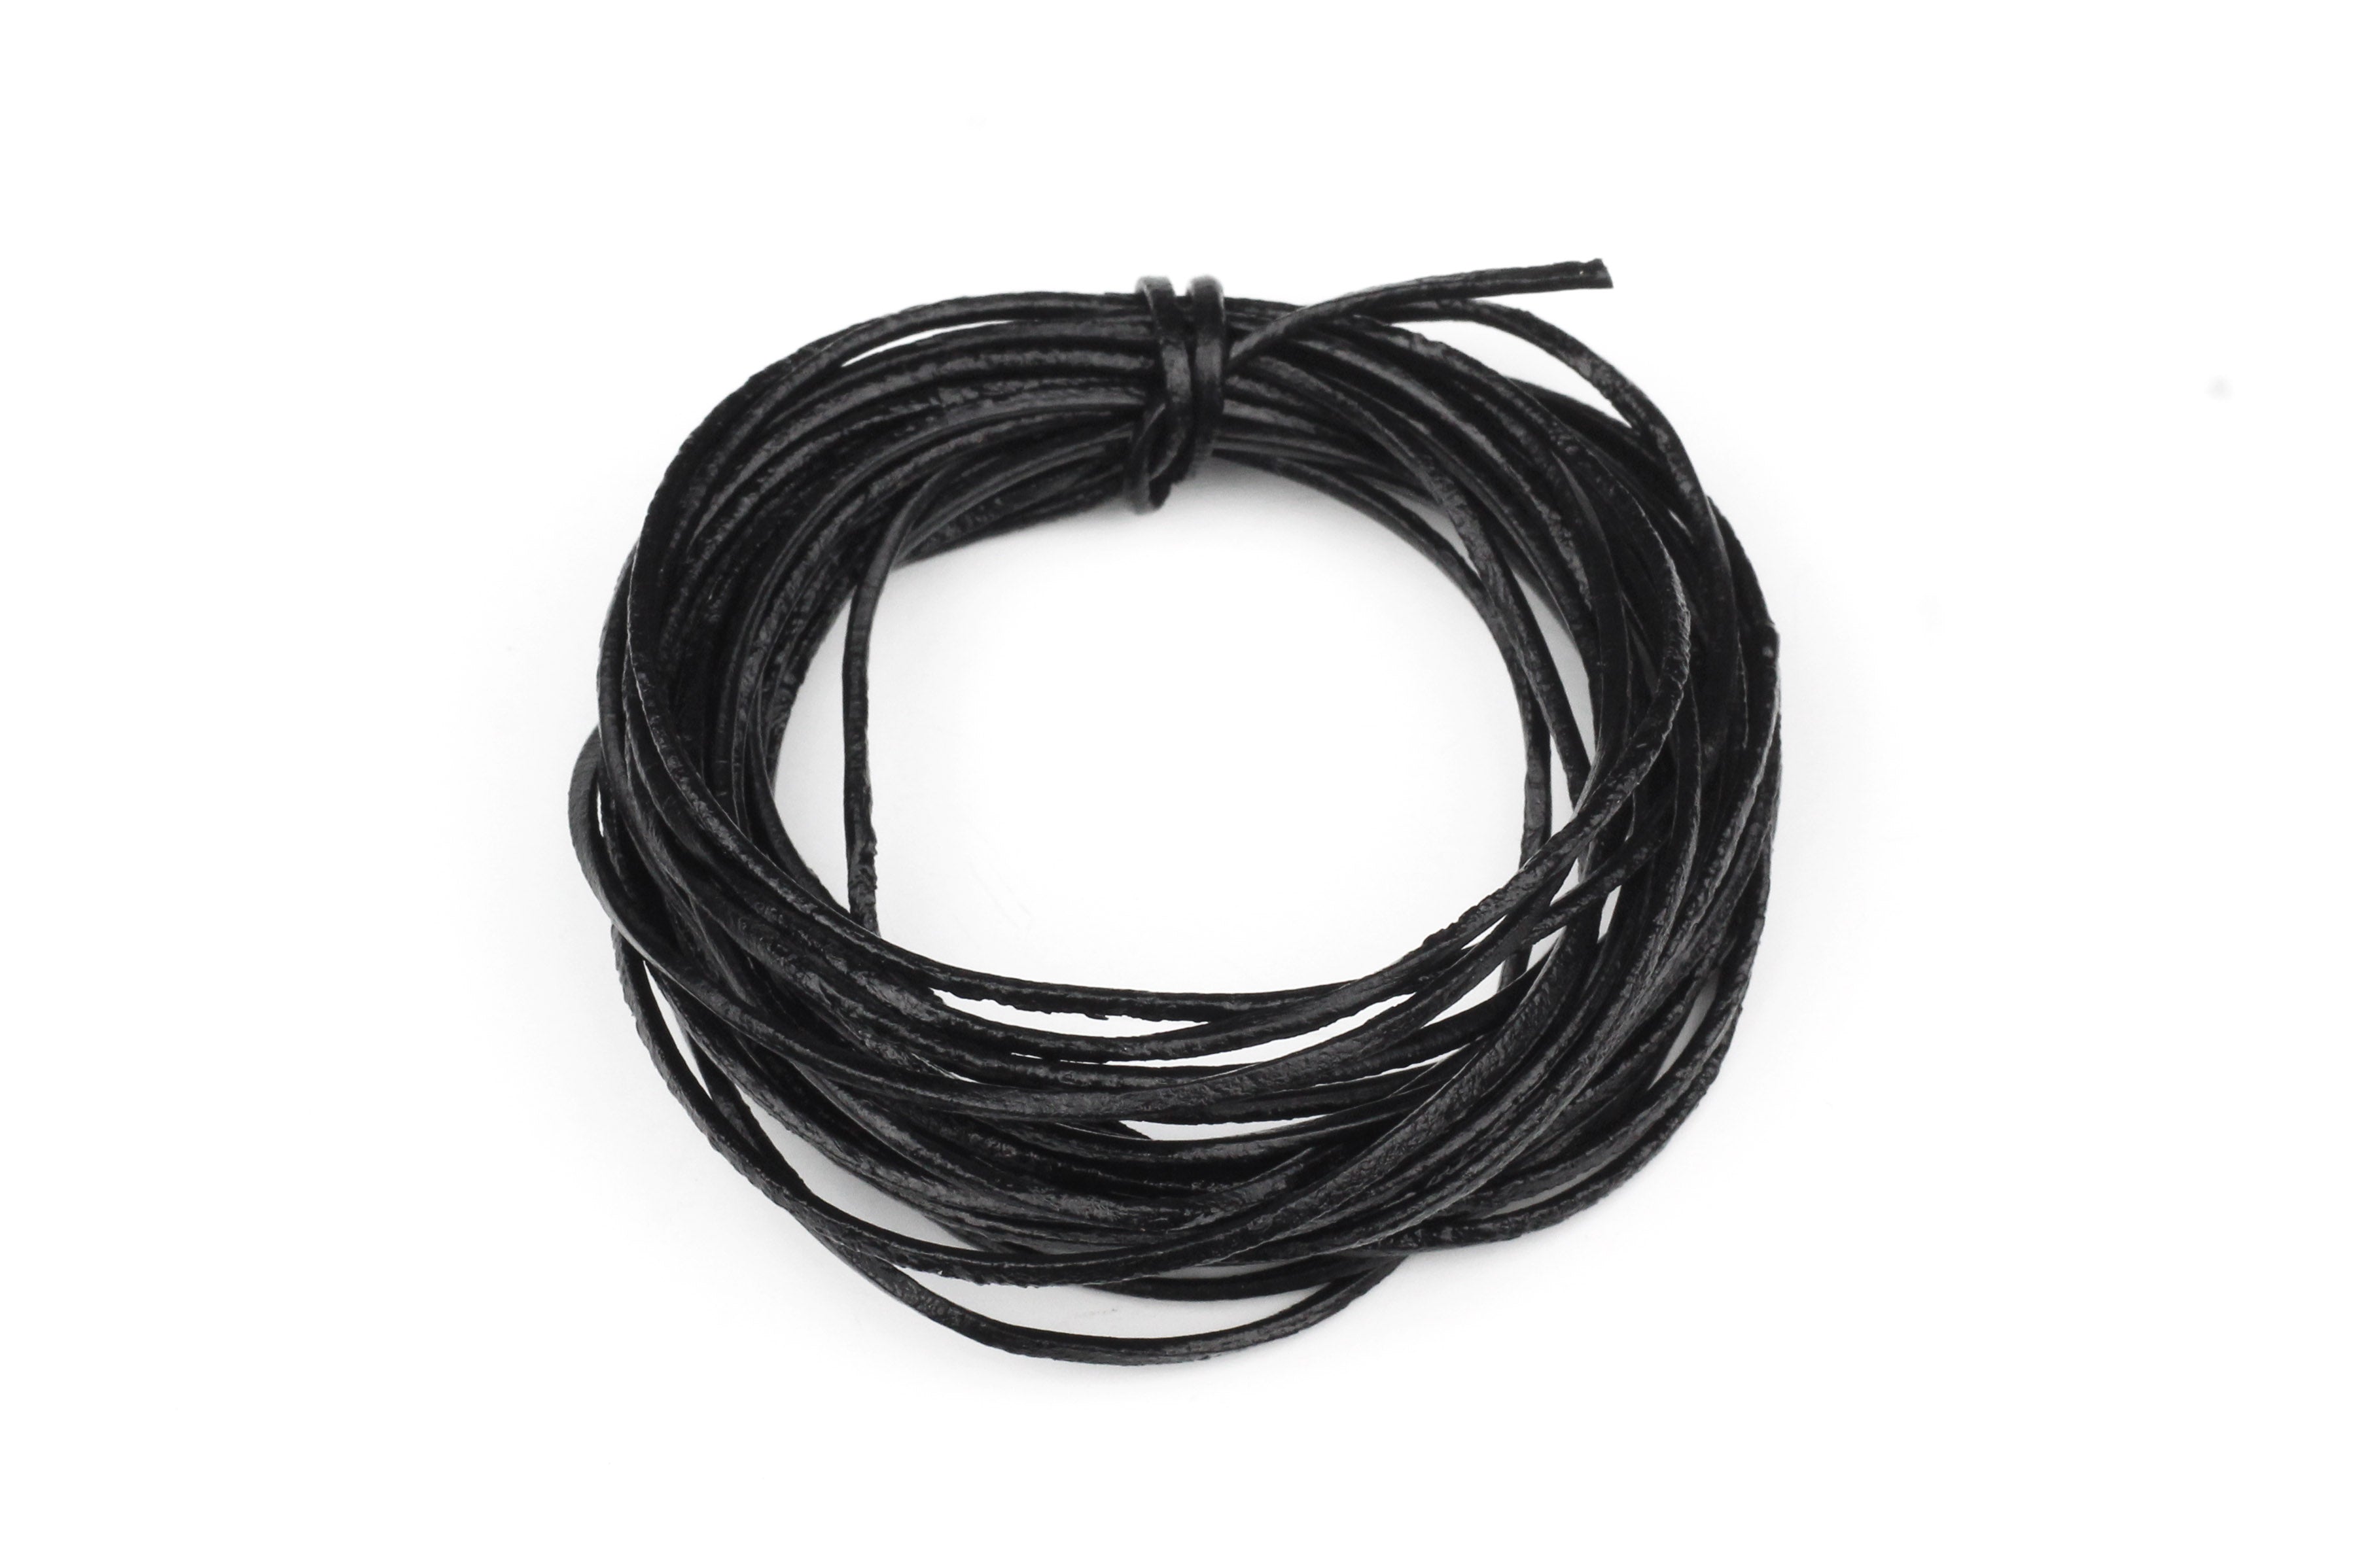 Leather Cord 